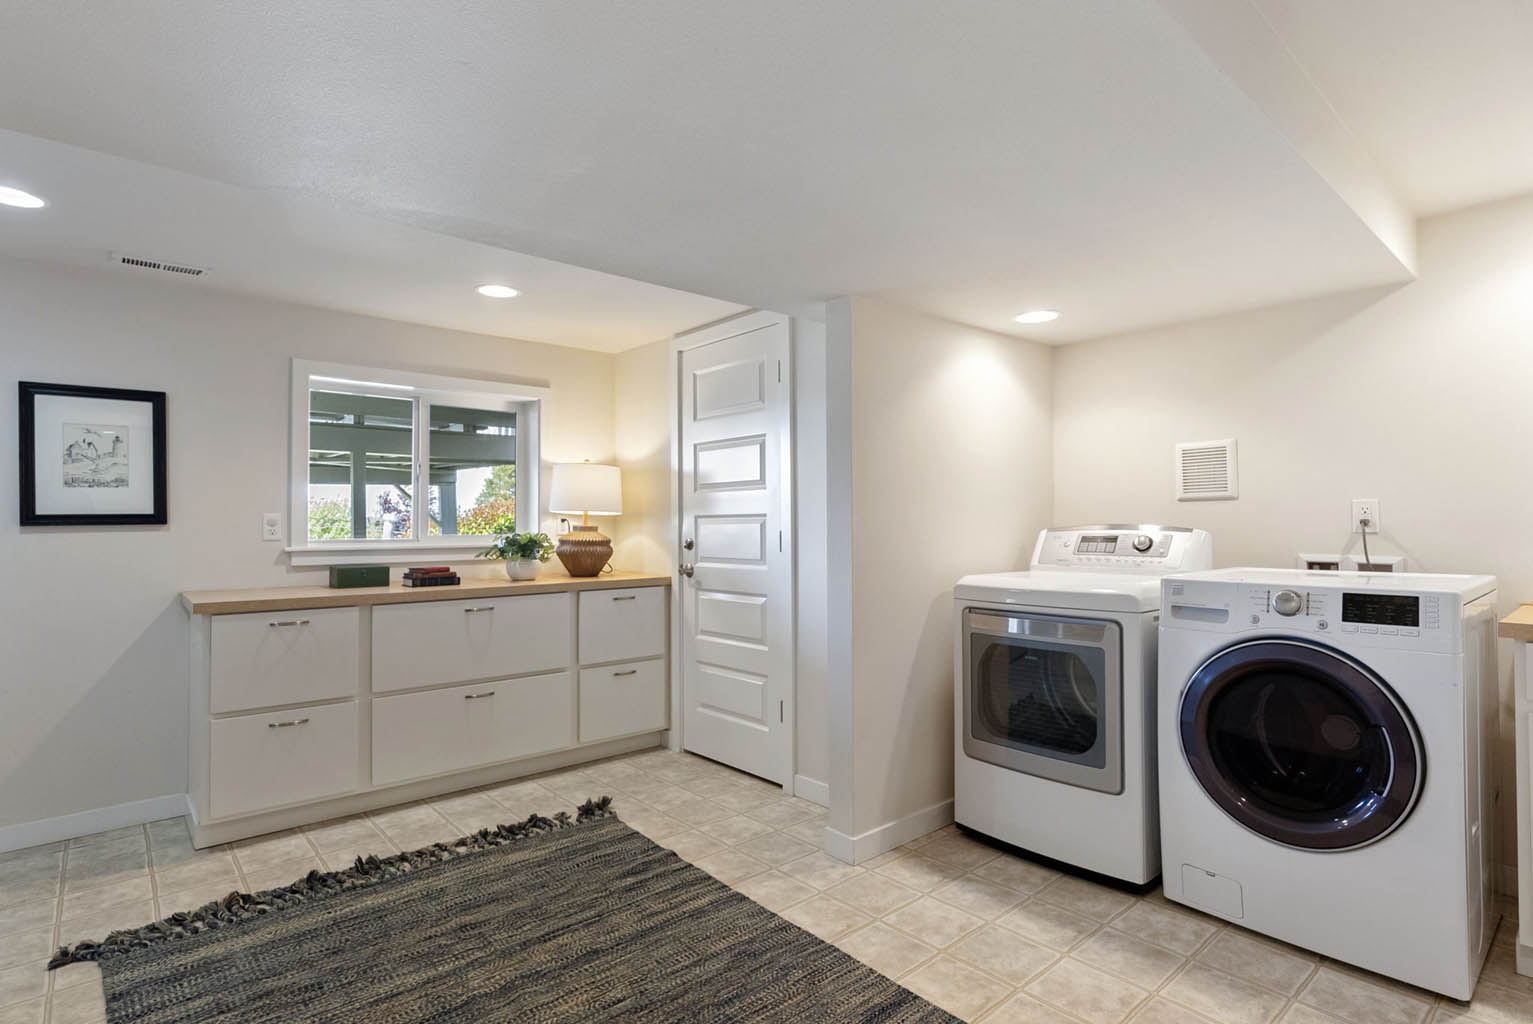 Utility space and laundry on the lower level